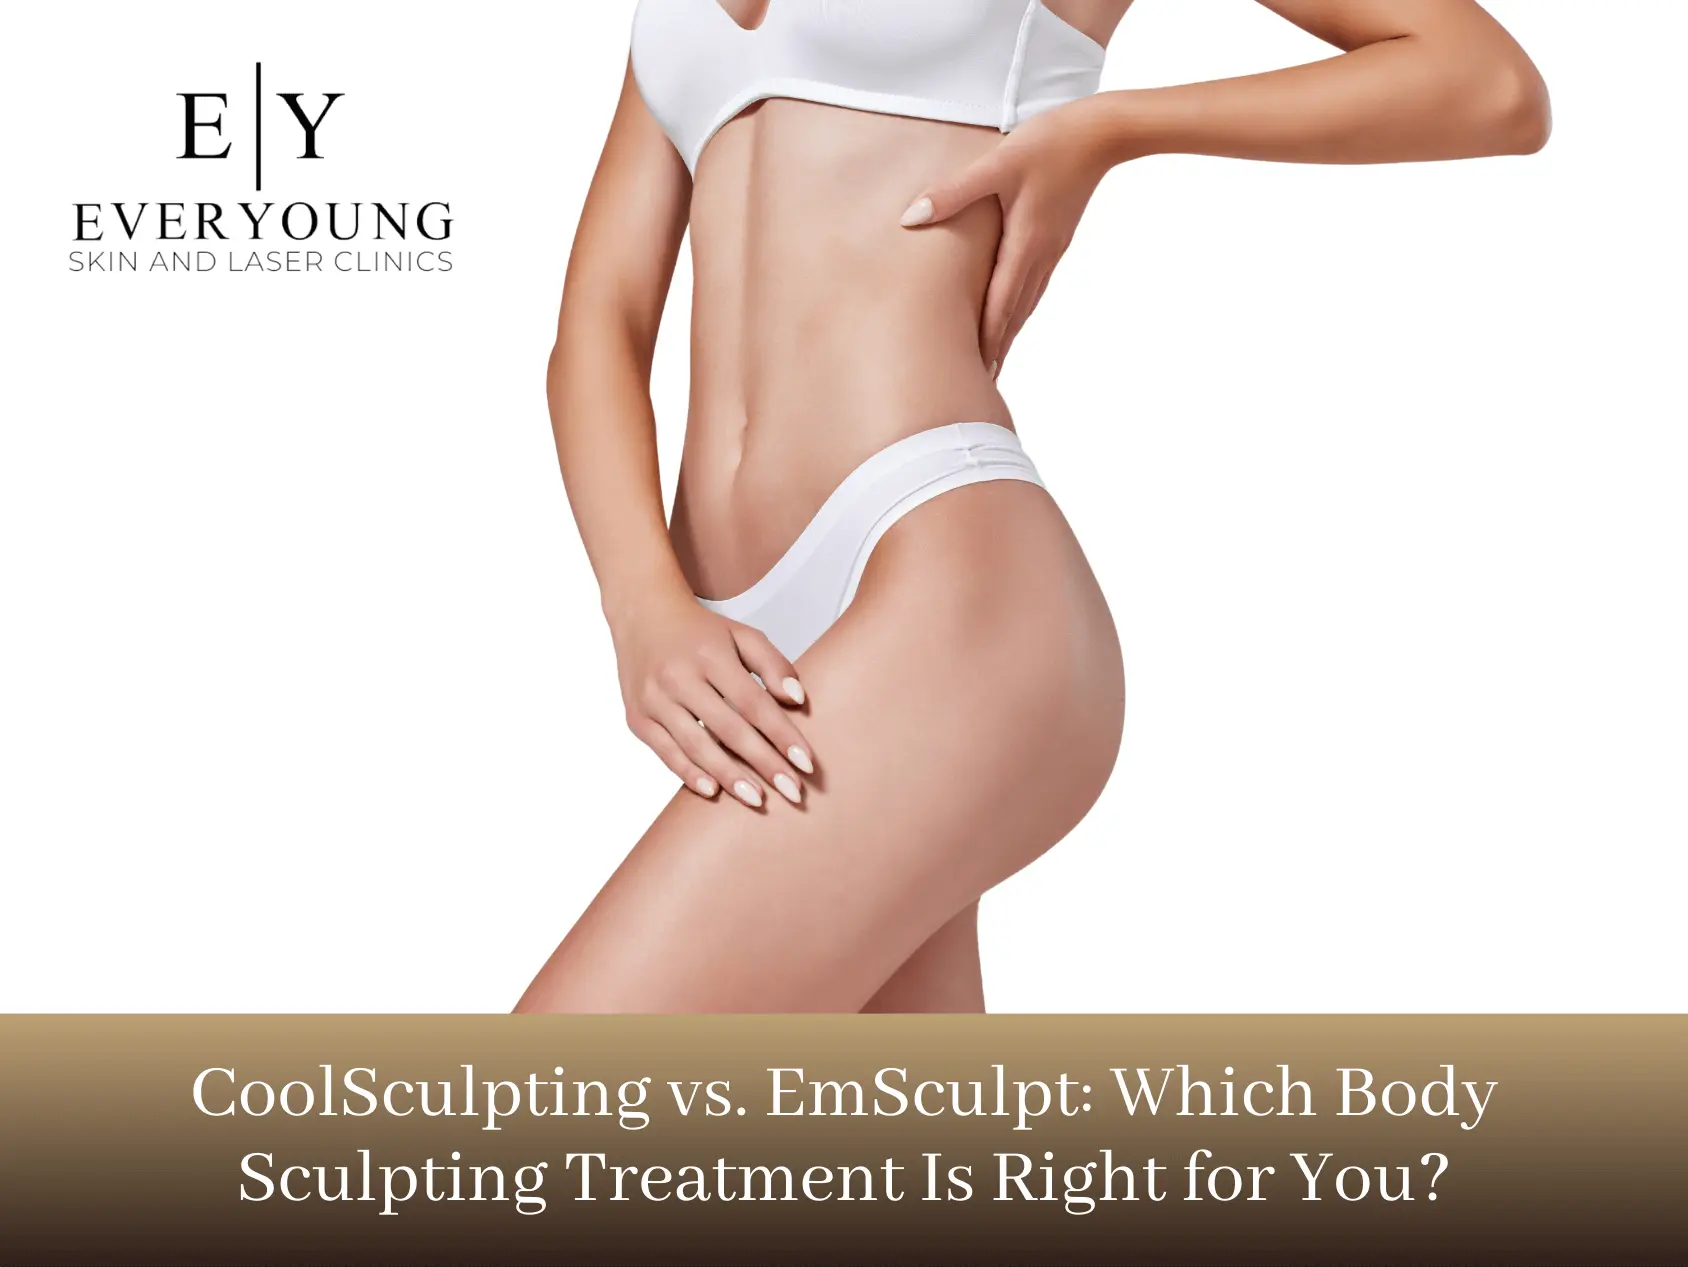 Coolsculpting vs EmSculpt: Which Body Sculpting Treatment is Right for You? | EverYoung Skin Care Clinic